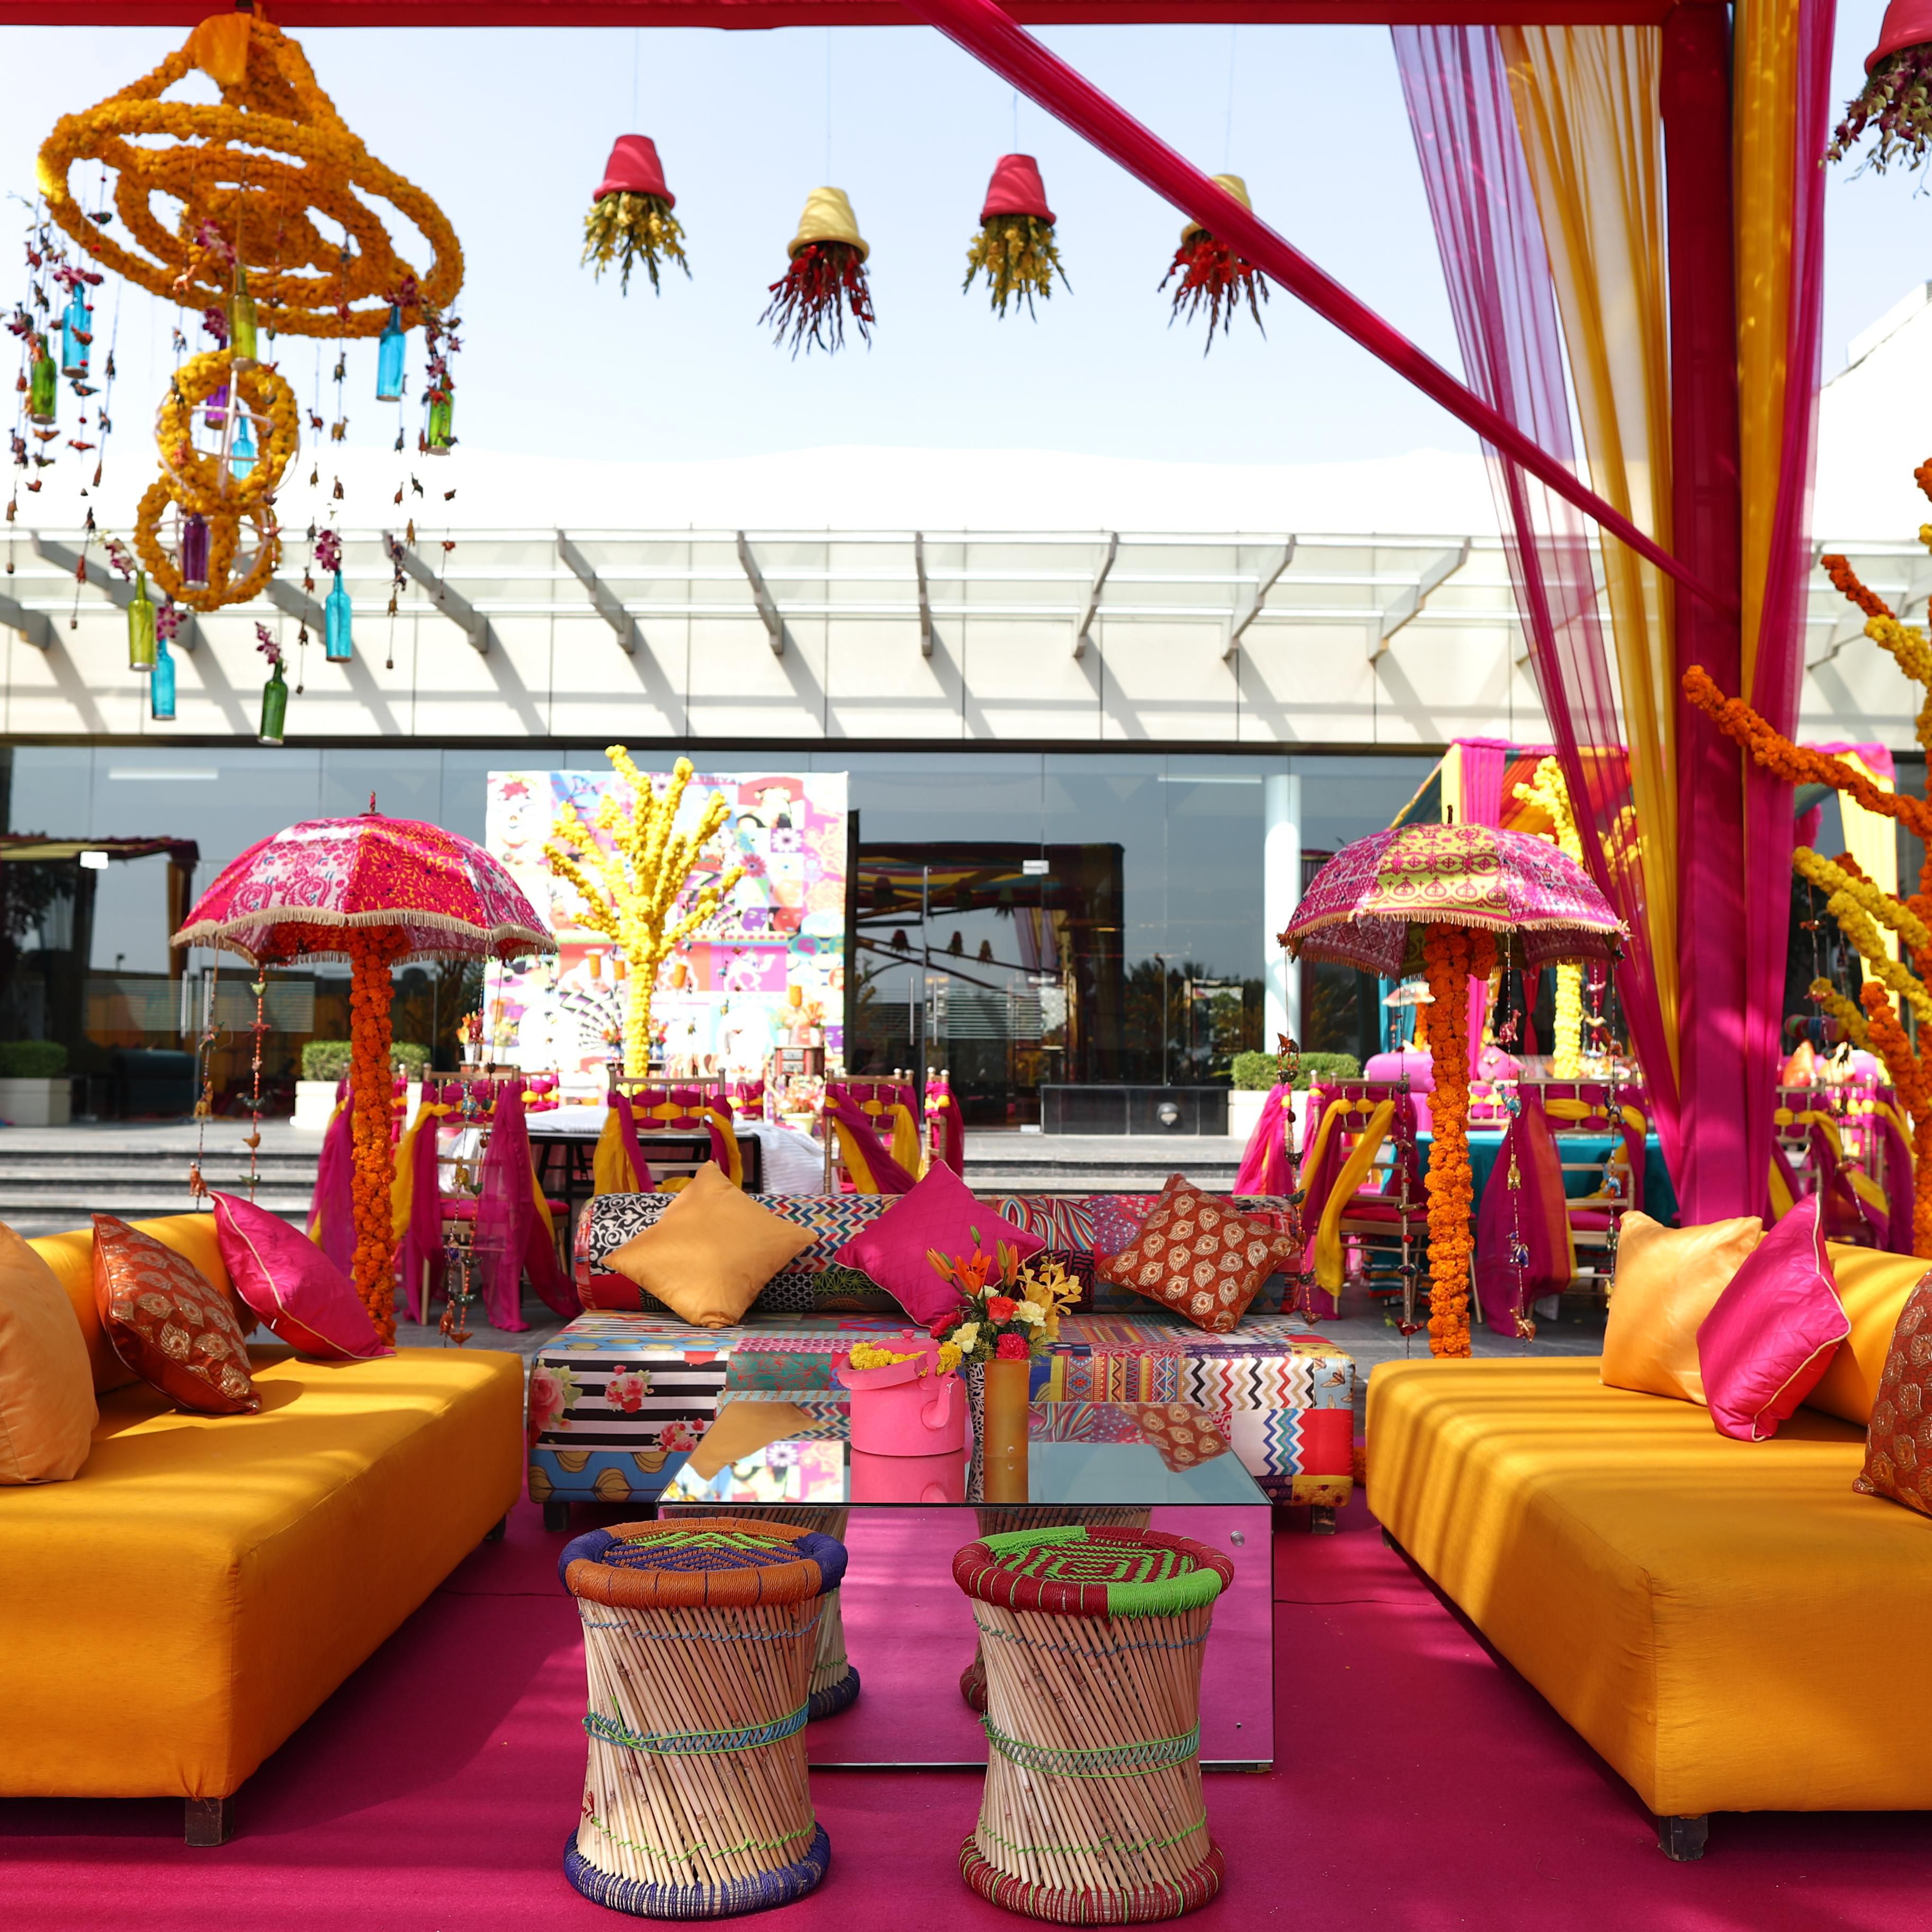 Organize your special events in the most colourful way